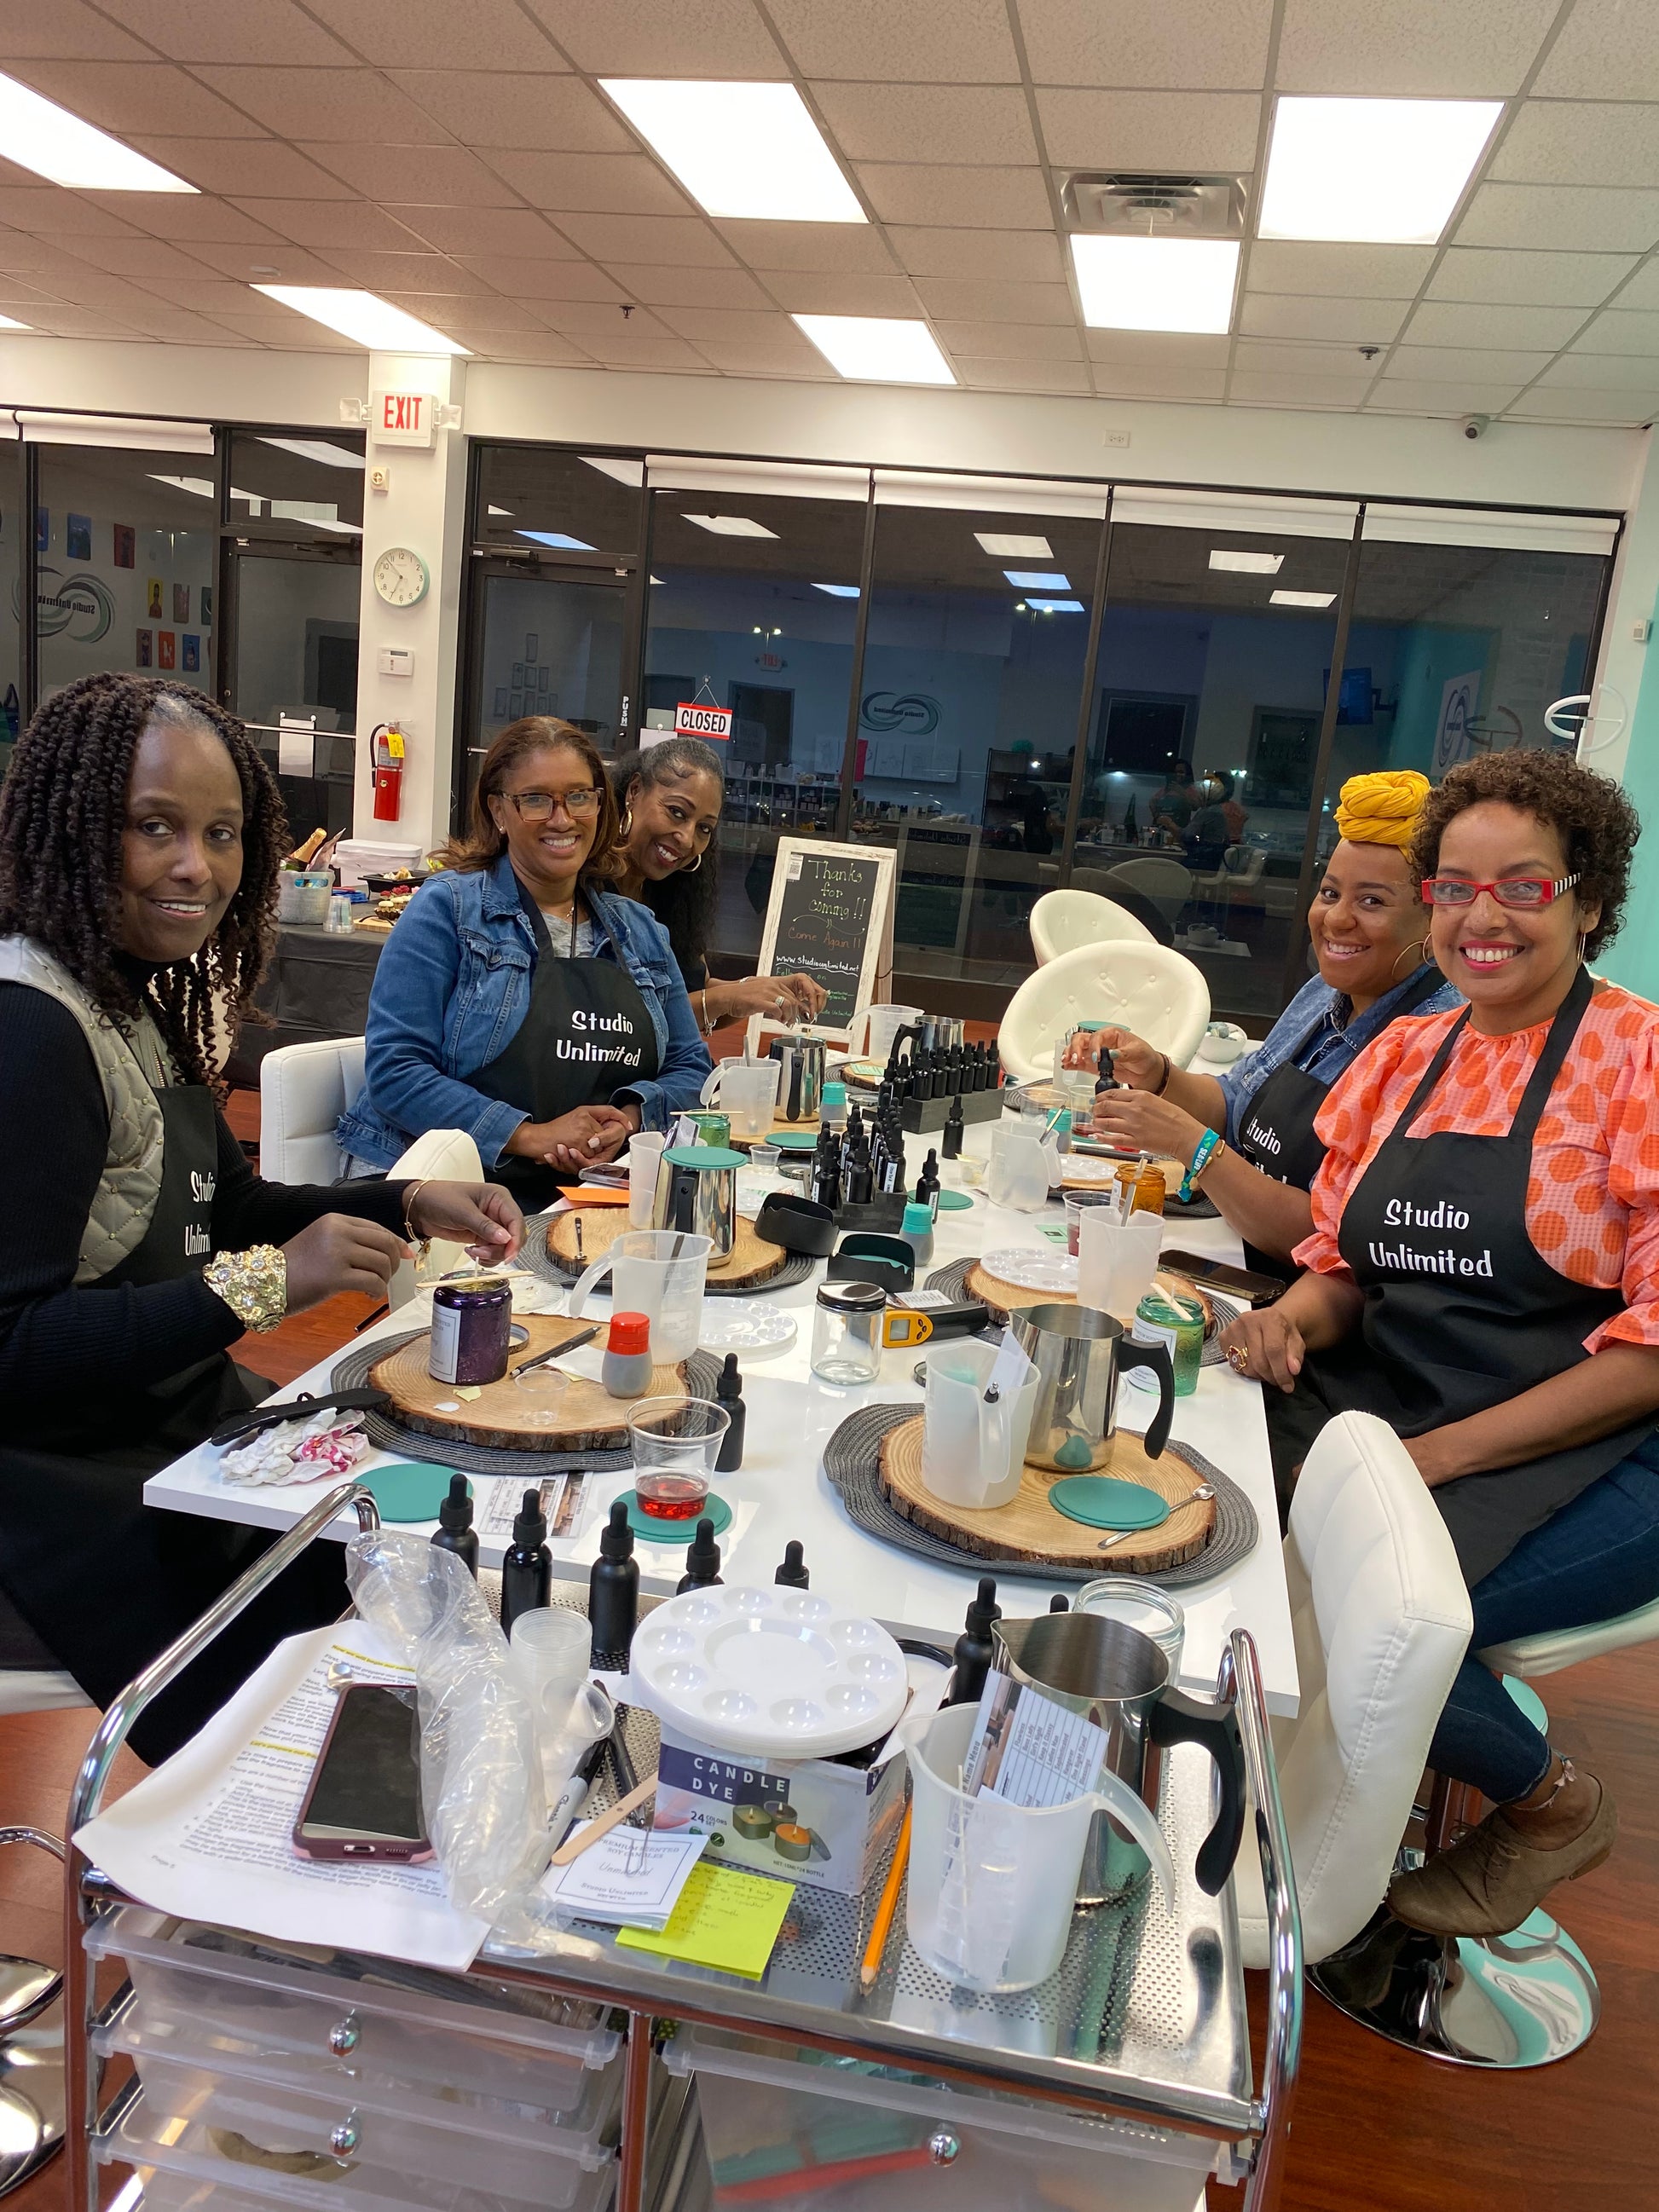 Sip & Scent - Candle Making Party